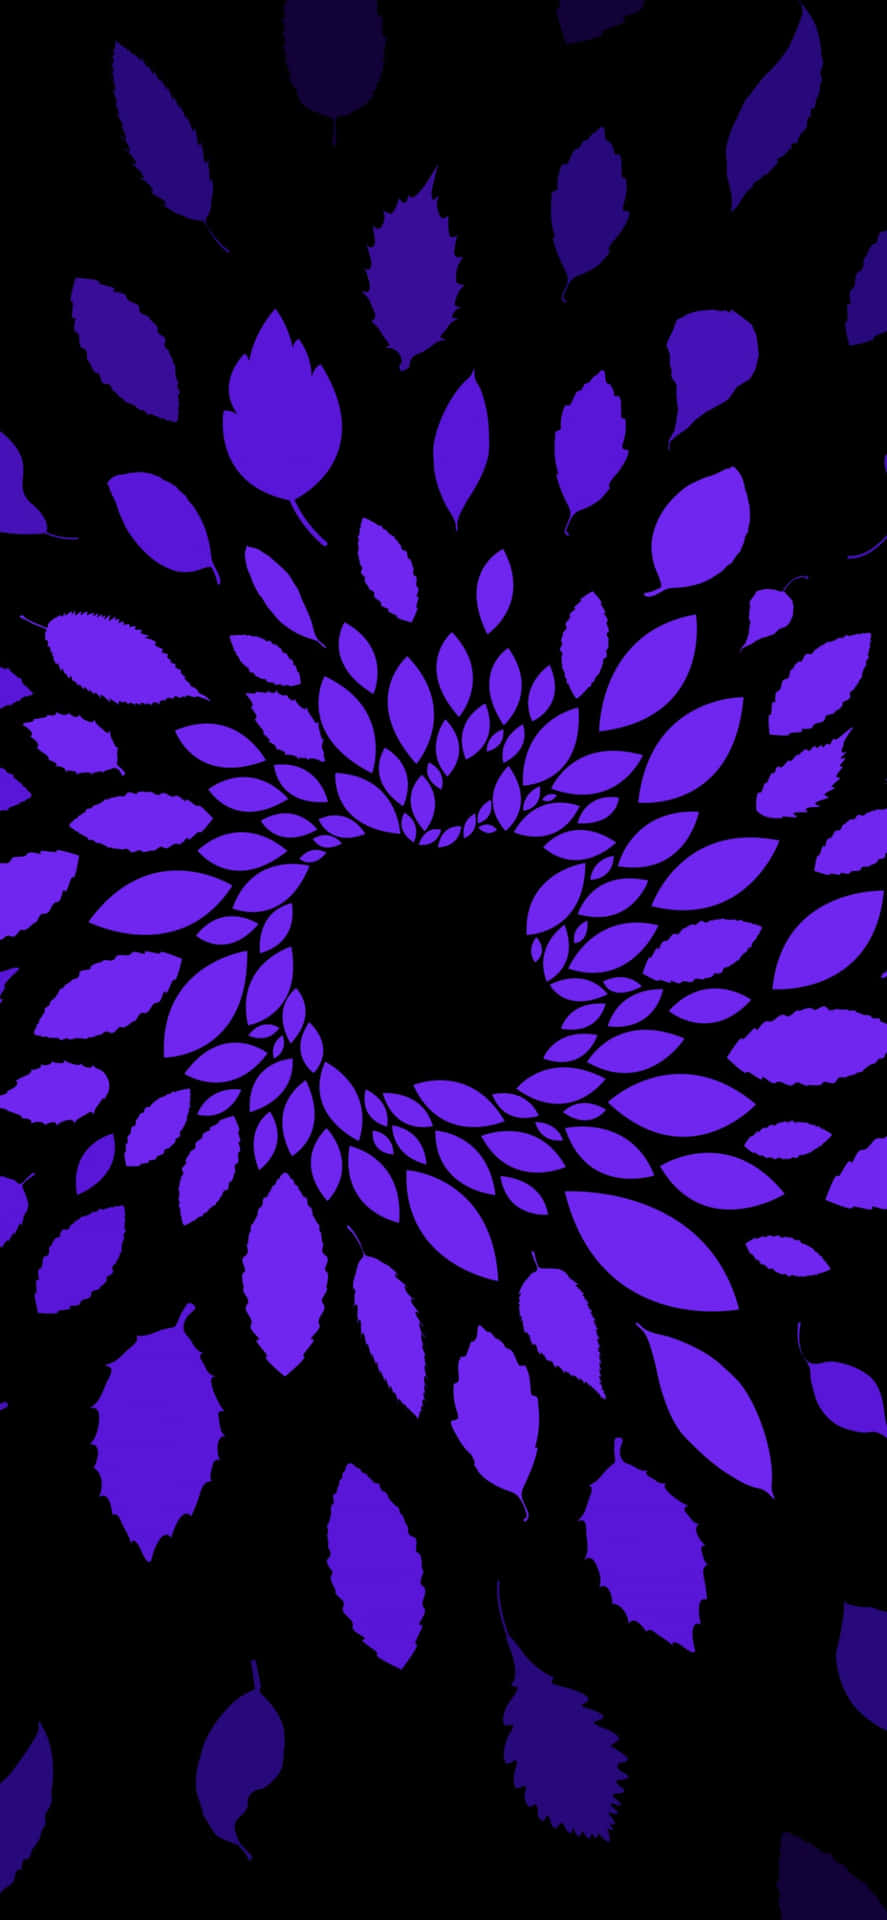 Apple Logo With Purple Leaves In The Background Wallpaper